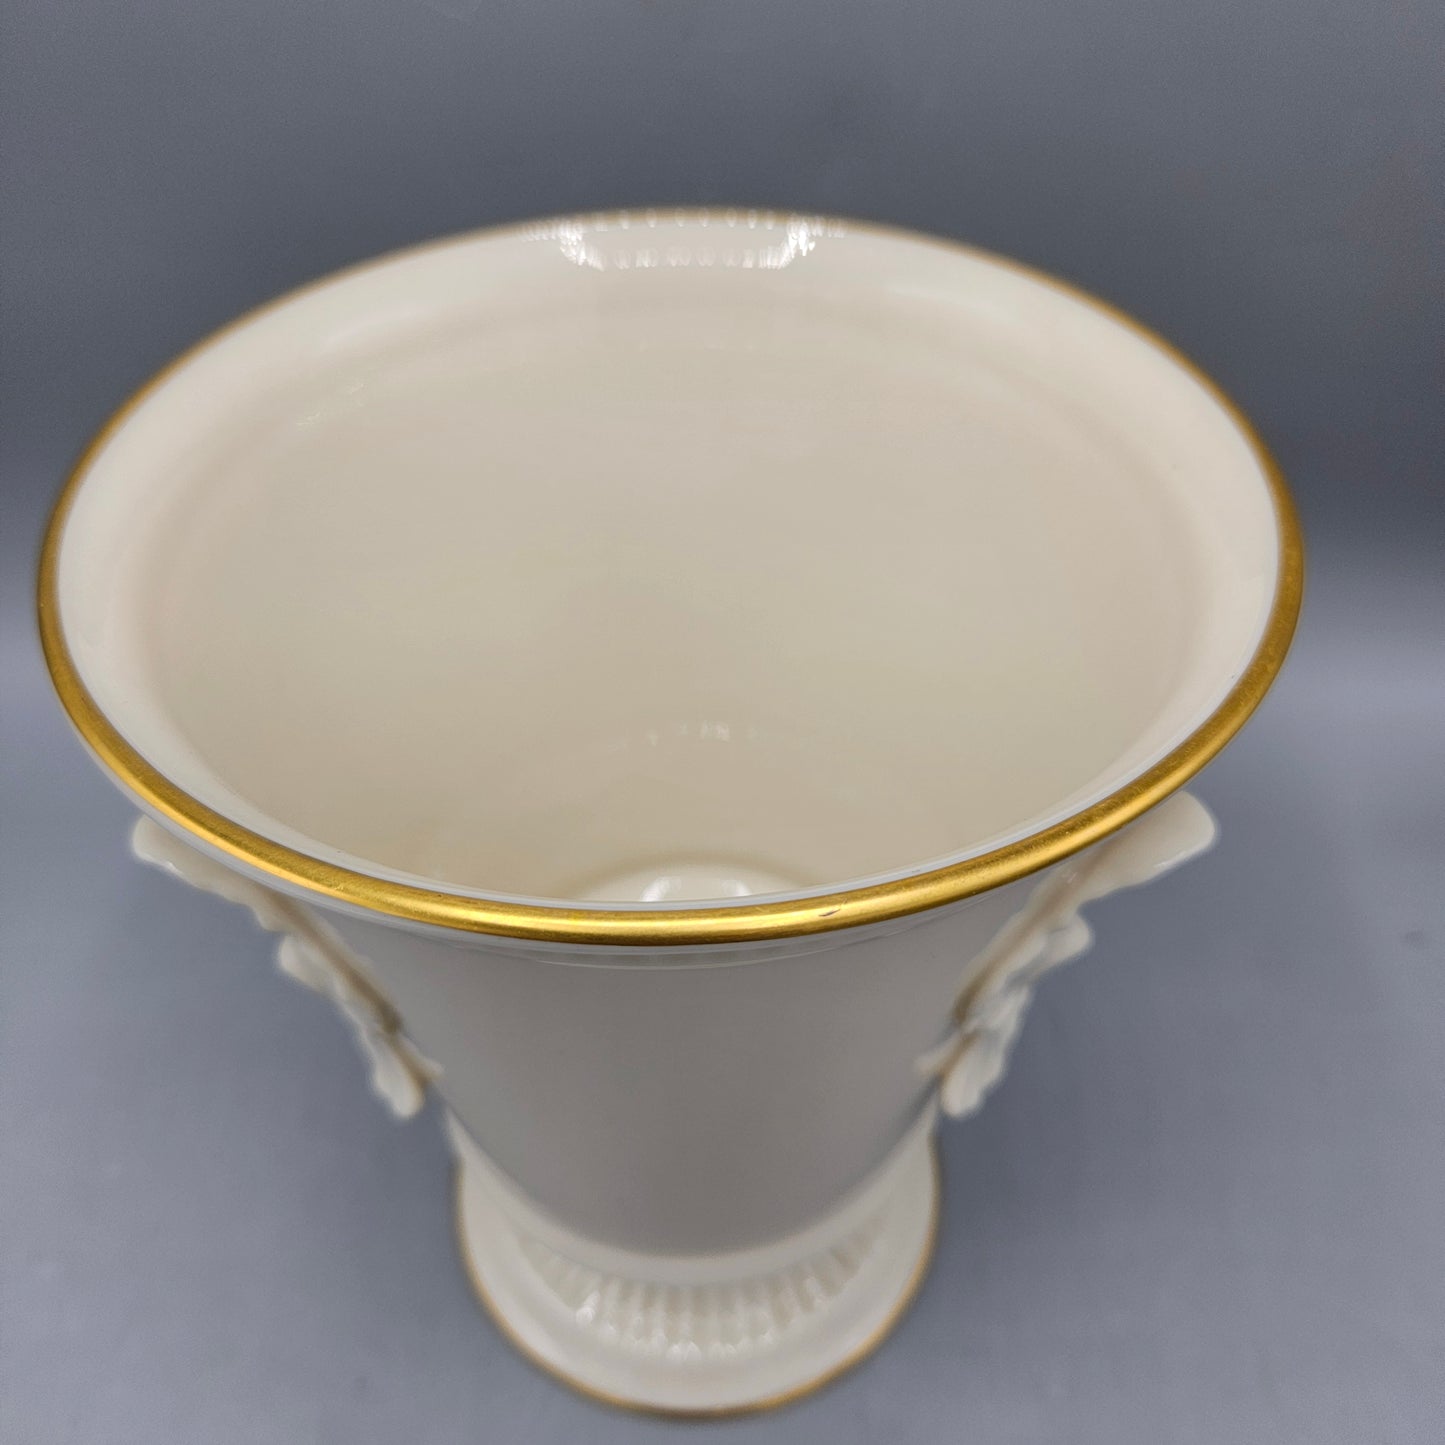 Vintage Athens Collection Vase by Lenox